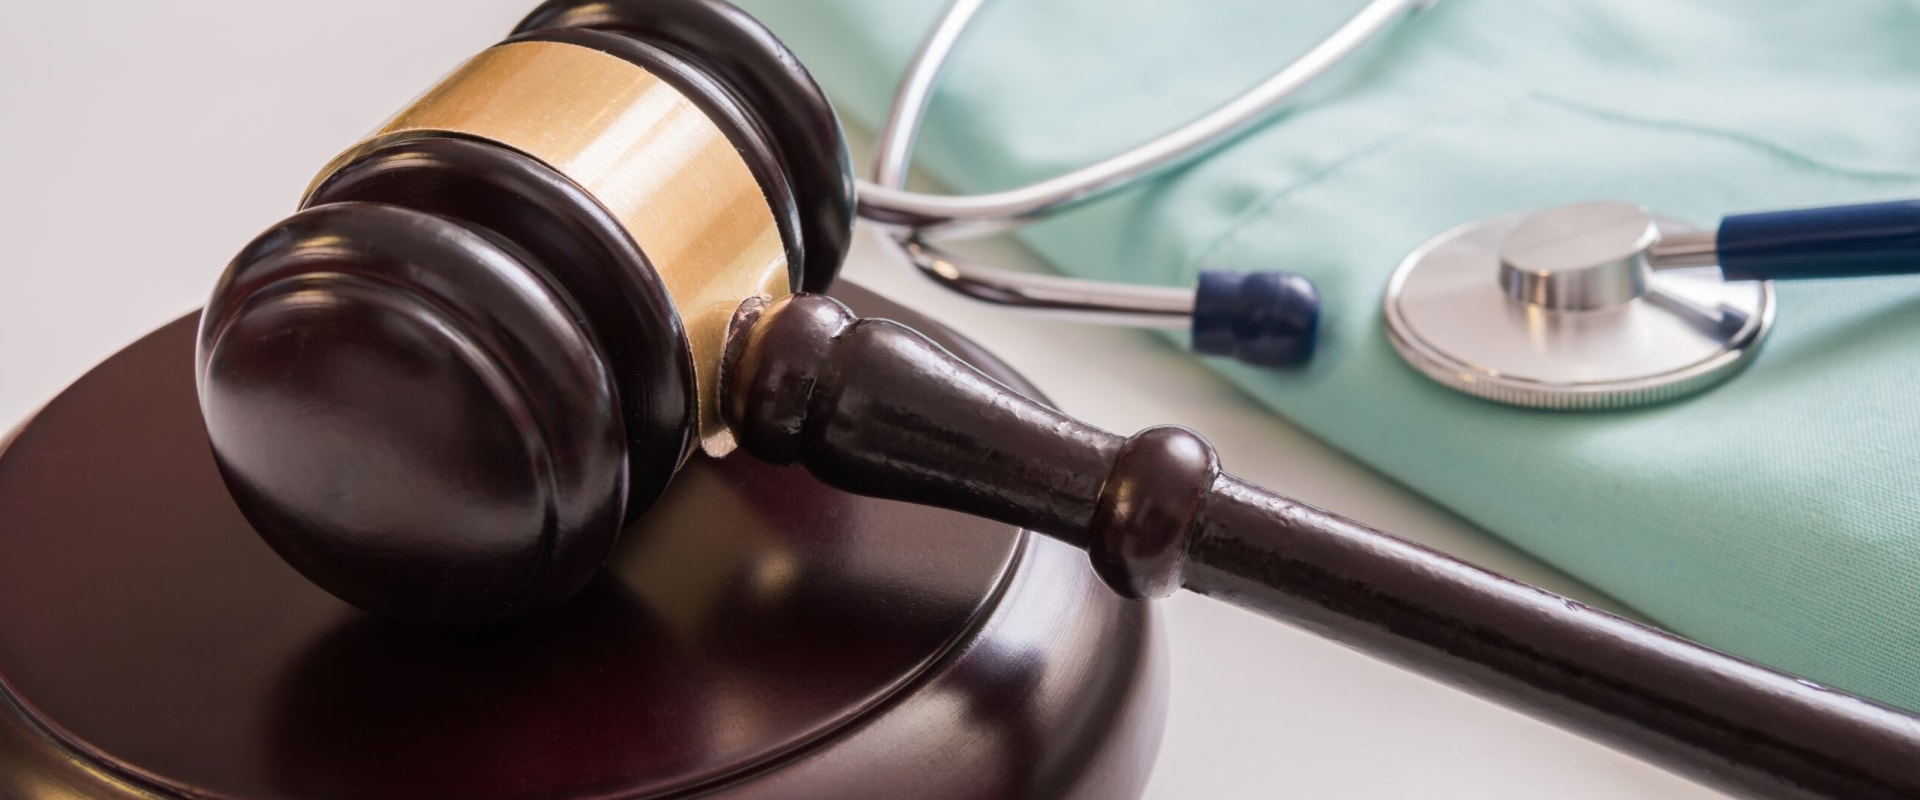 What factors lead to medical malpractice claims?